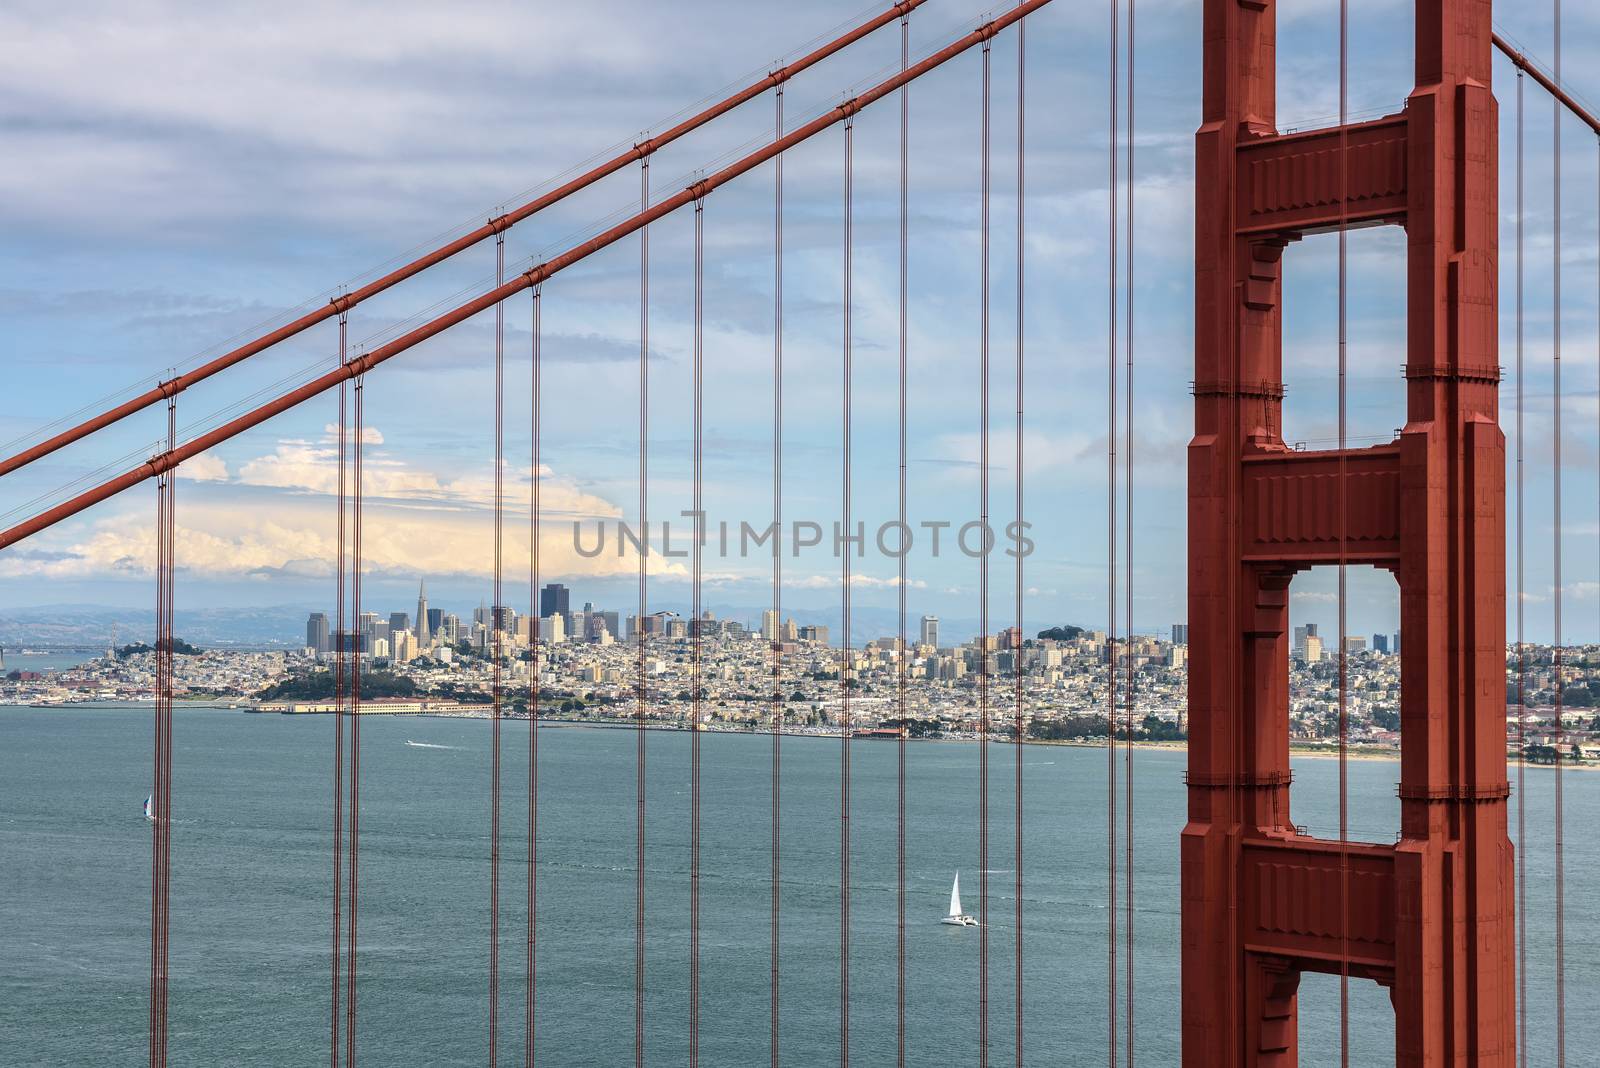 Golden Gate Bridge and downtown San Francisco by nickfox